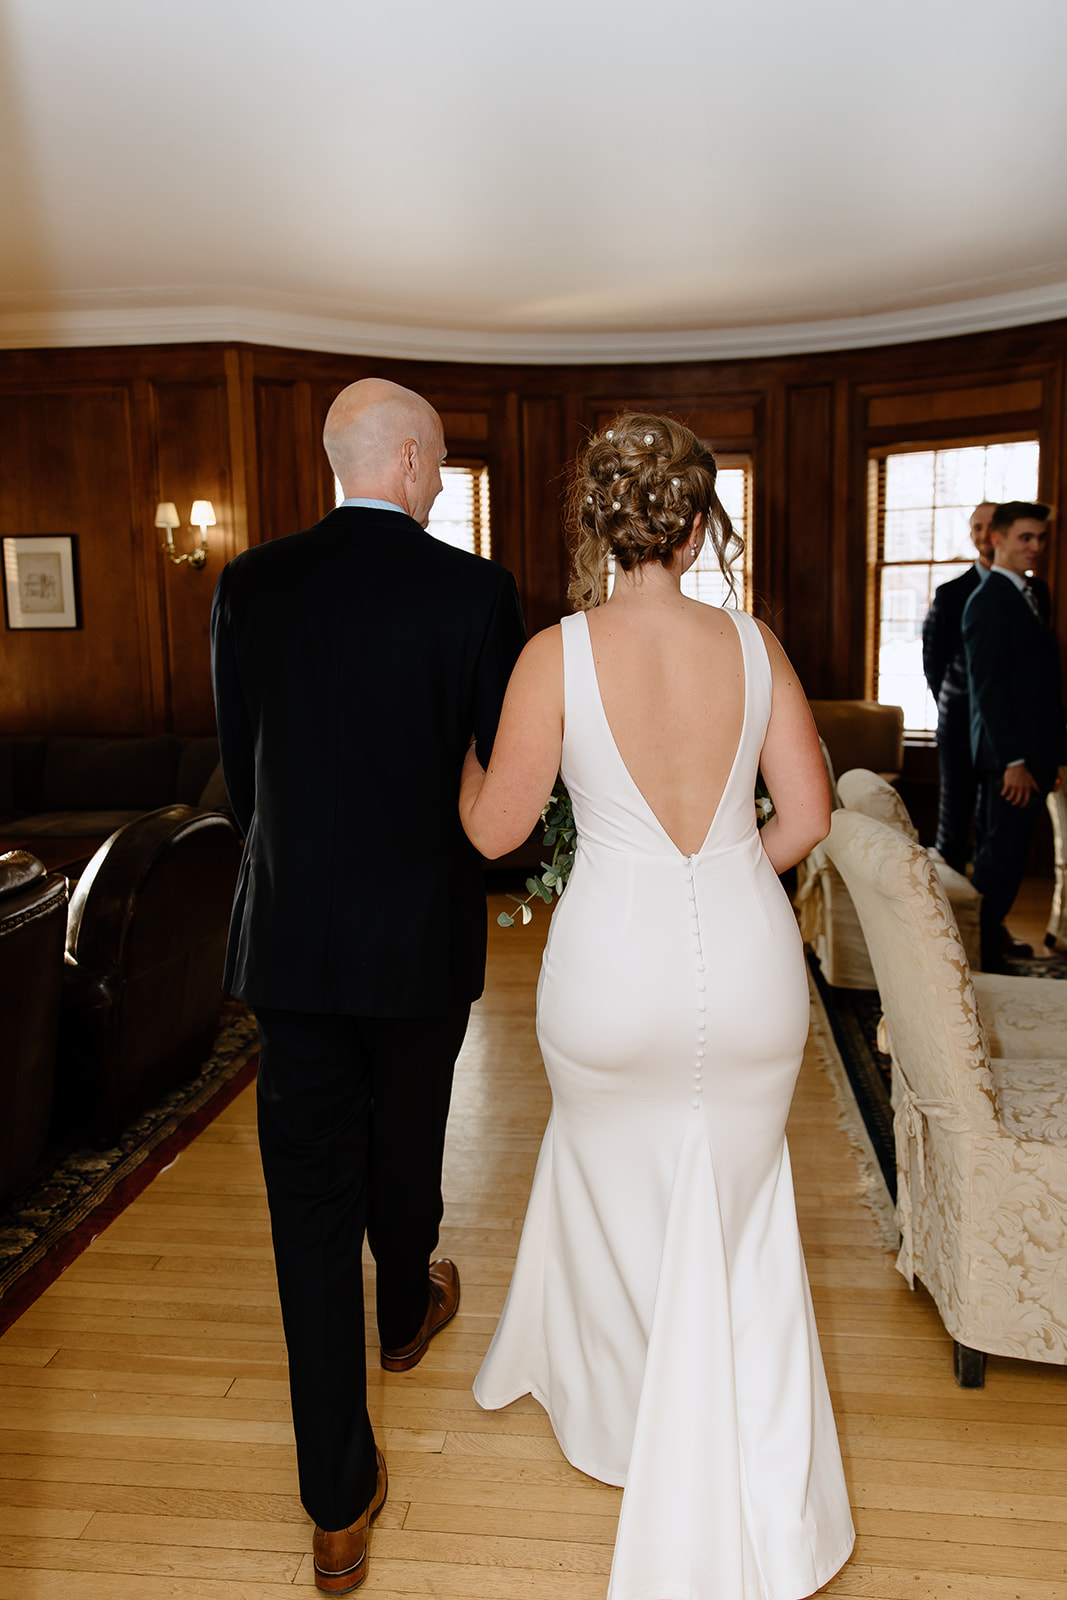 Bride and her father walking into the ceremony